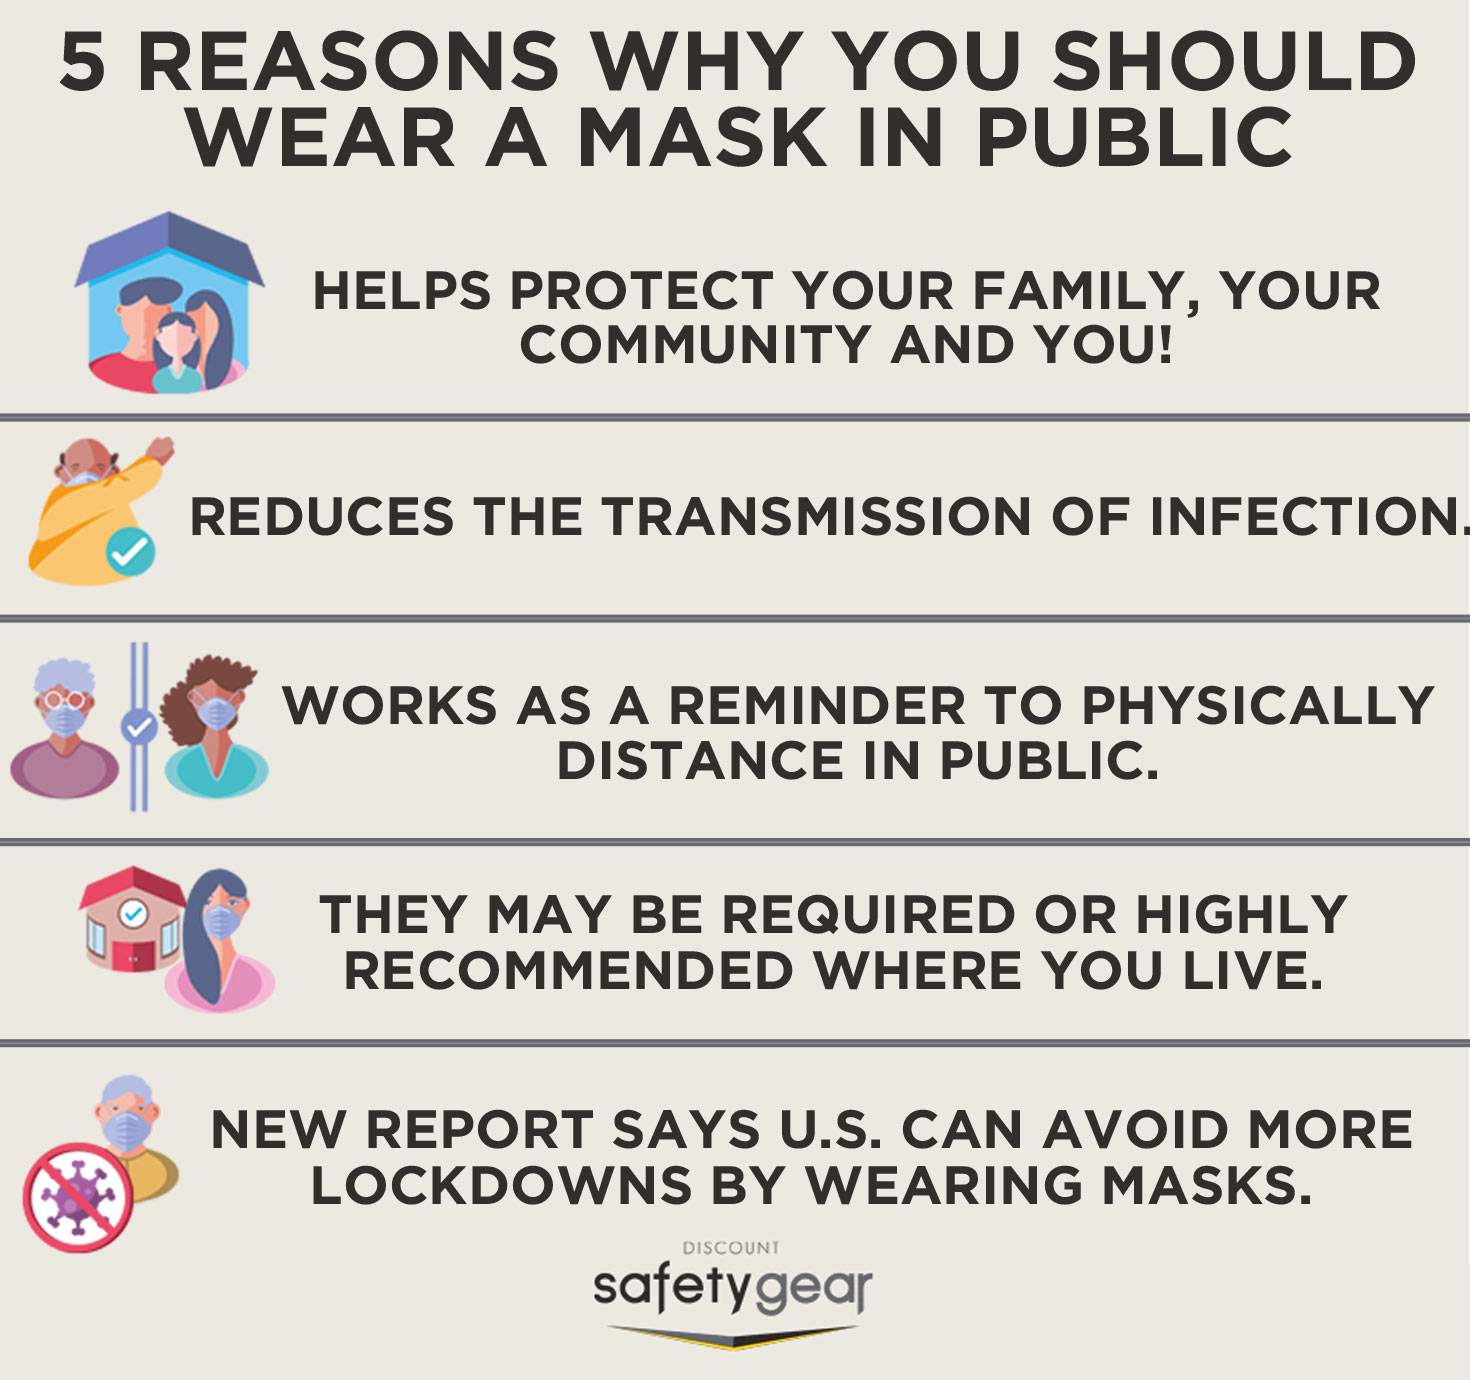 5 Reasons to Wear a Mask